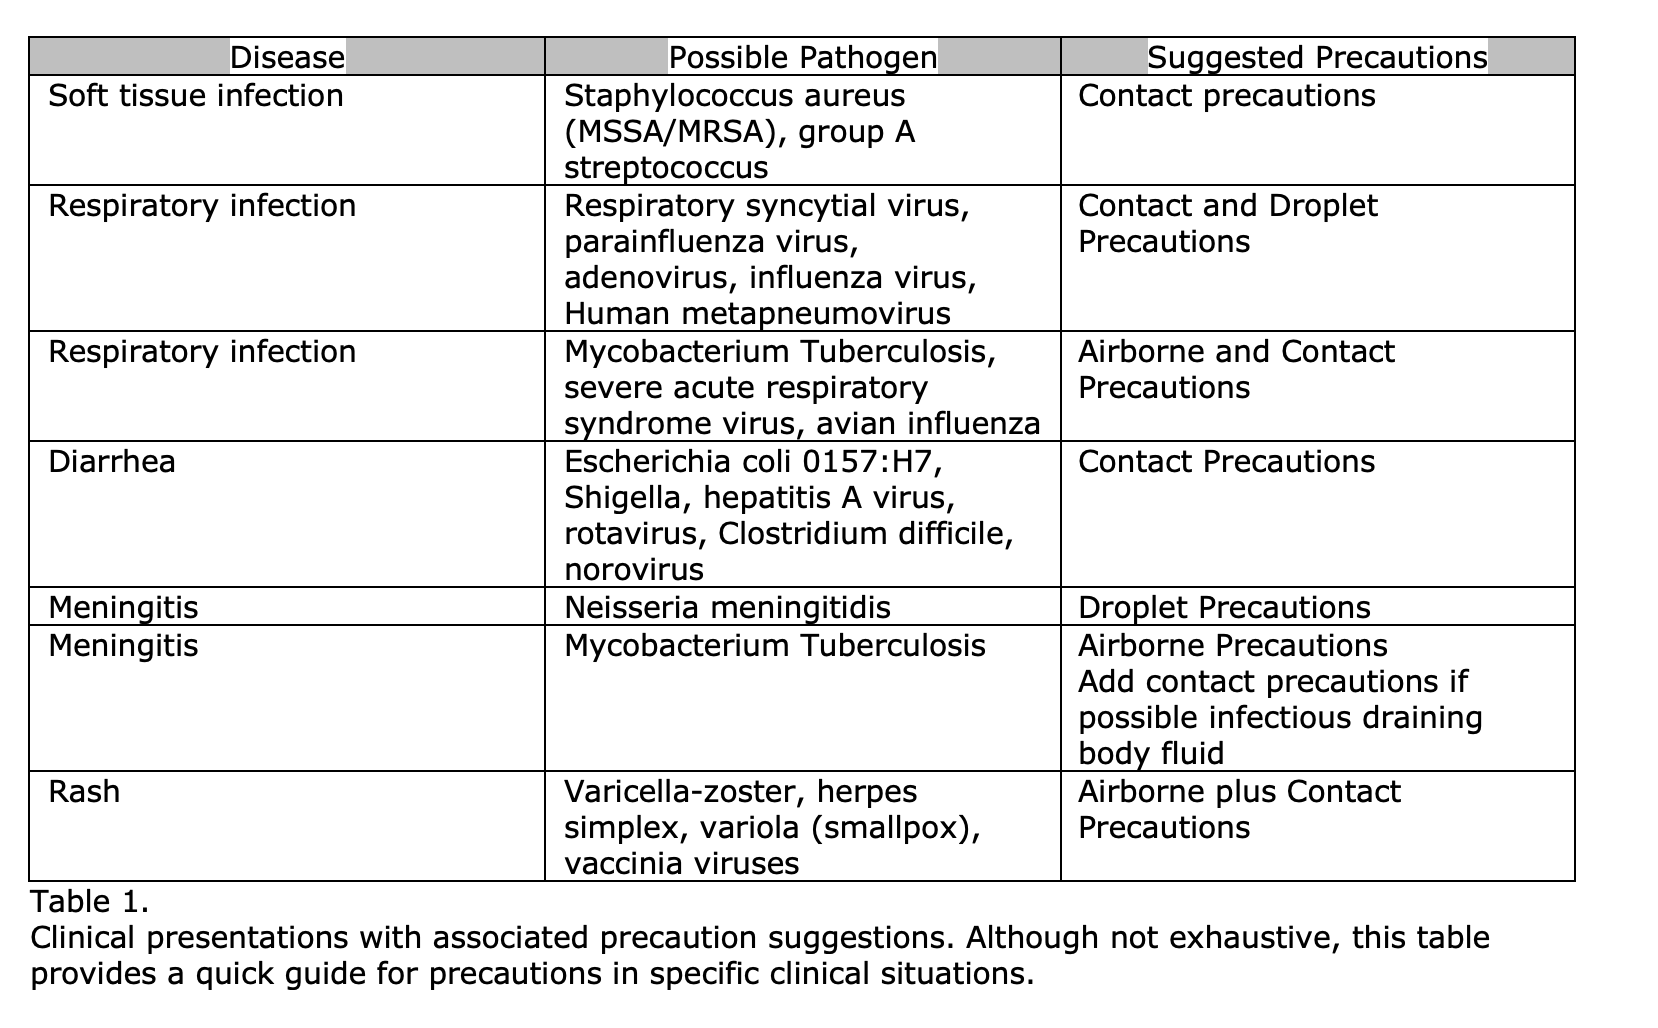 Table of clinical presentations and recommended precautions